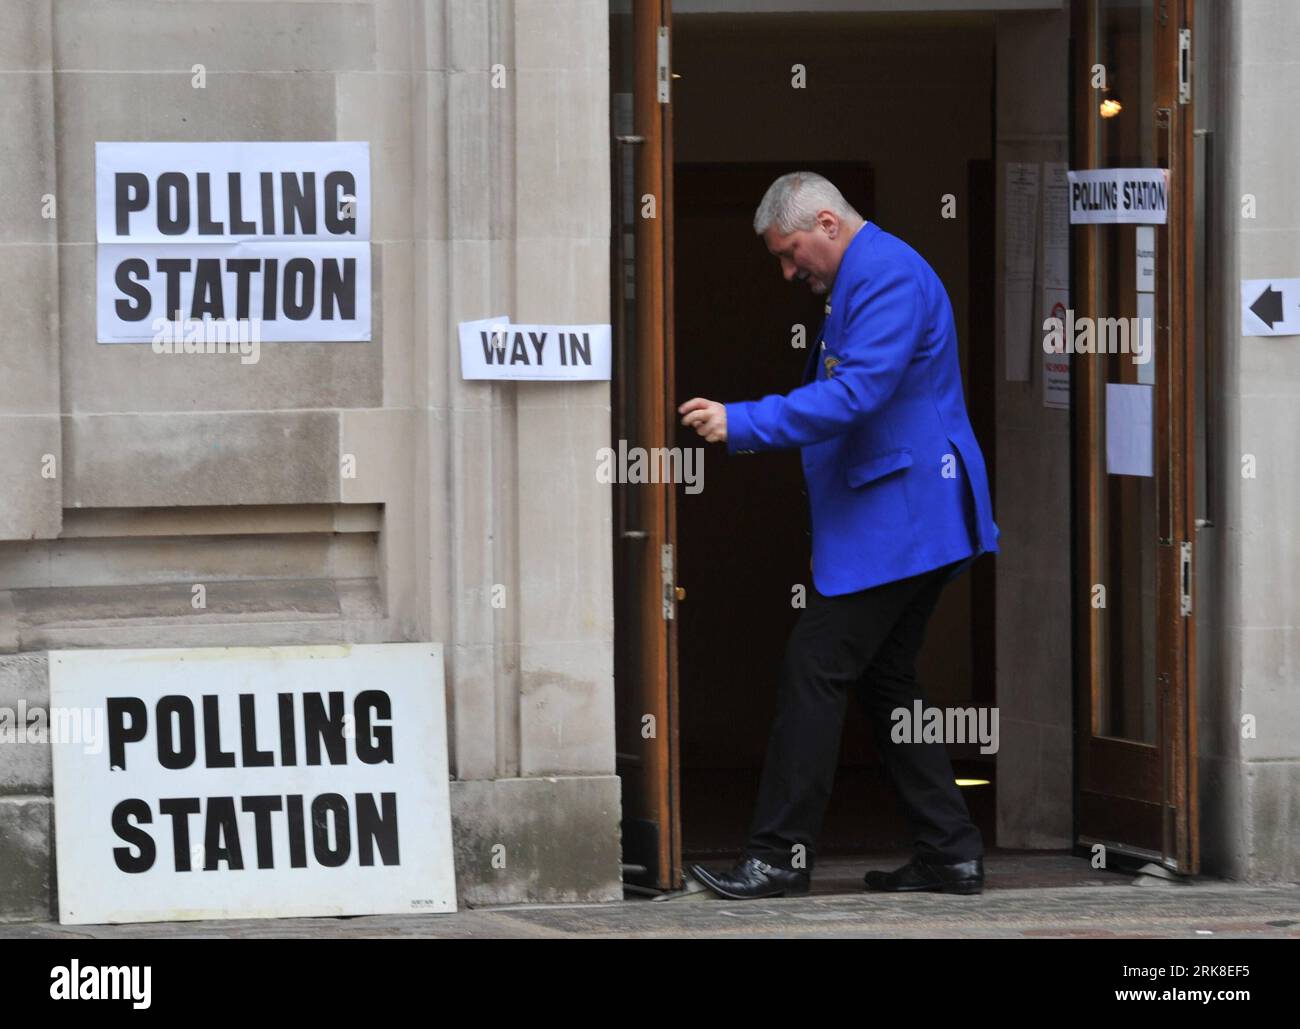 Bildnummer: 54027877  Datum: 06.05.2010  Copyright: imago/Xinhua  A staff member opens the gate of a polling station in London, capital of Britain, May 6, 2010. Millions of in Britain went to polls on Thursday morning as up to 50,000 polling stations across the country opened for ballots. (Xinhua/Wu Wei) (msq) BRITAIN-ELECTION-VOTE PUBLICATIONxNOTxINxCHN Politik Grossbritannien Wahlen premiumd xint kbdig xcb 2010 quer o00 Wahllokal    Bildnummer 54027877 Date 06 05 2010 Copyright Imago XINHUA a Staff member Opens The Gate of a Polling Station in London Capital of Britain May 6 2010 Millions of Stock Photo